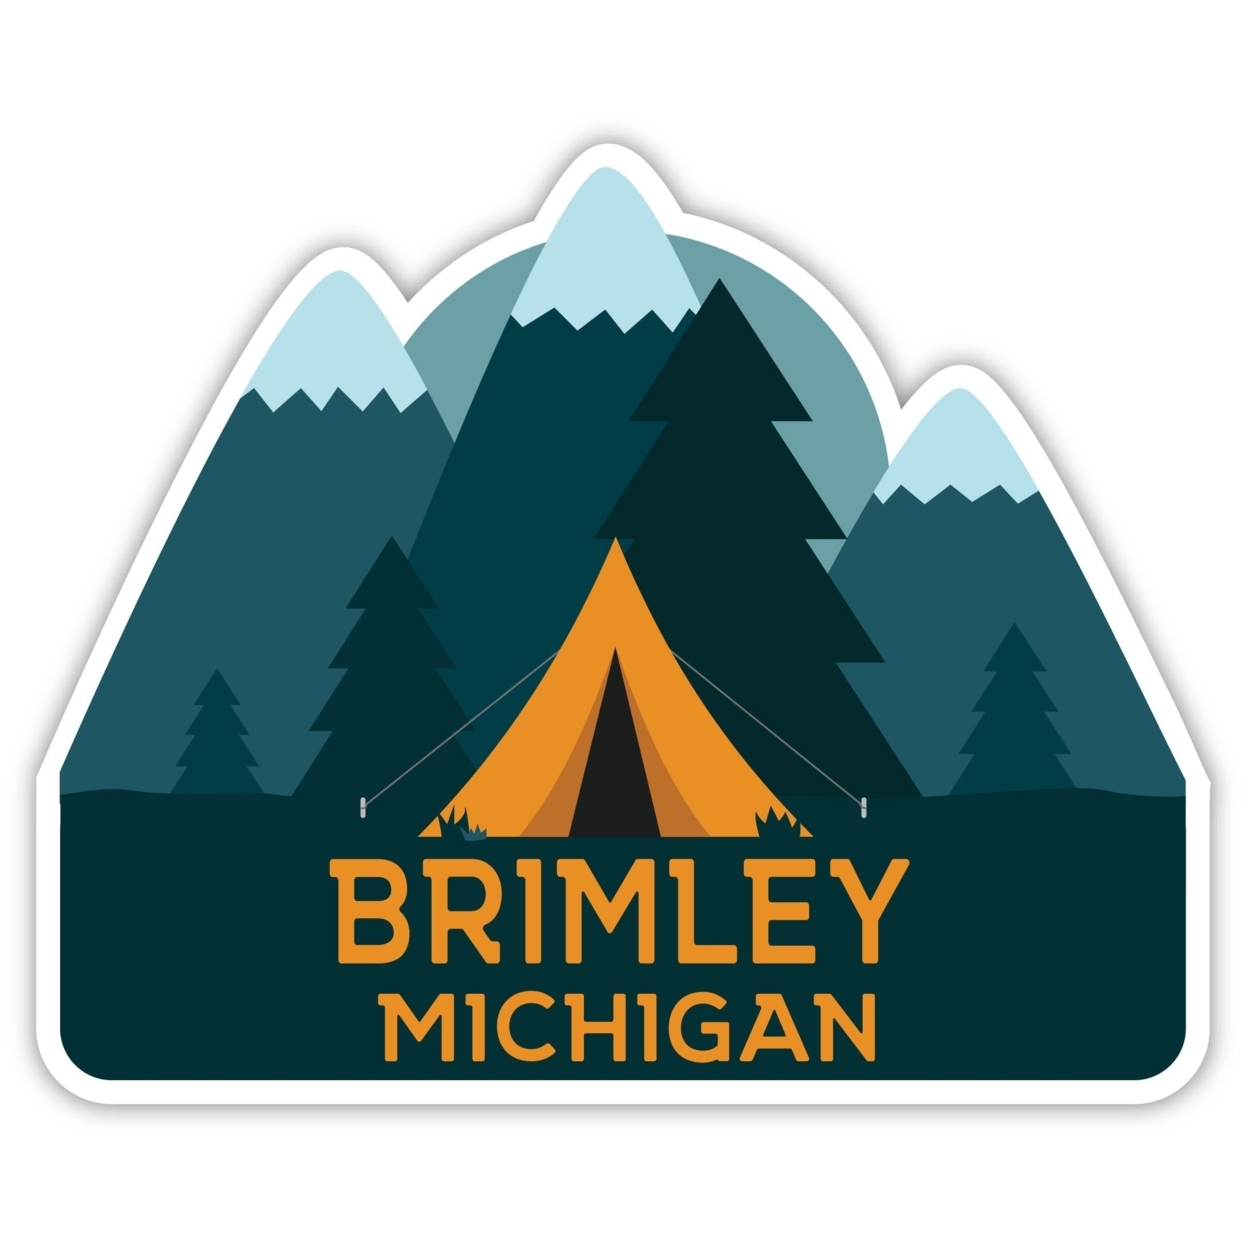 Brimley Michigan Souvenir Decorative Stickers (Choose Theme And Size) - 4-Pack, 4-Inch, Tent